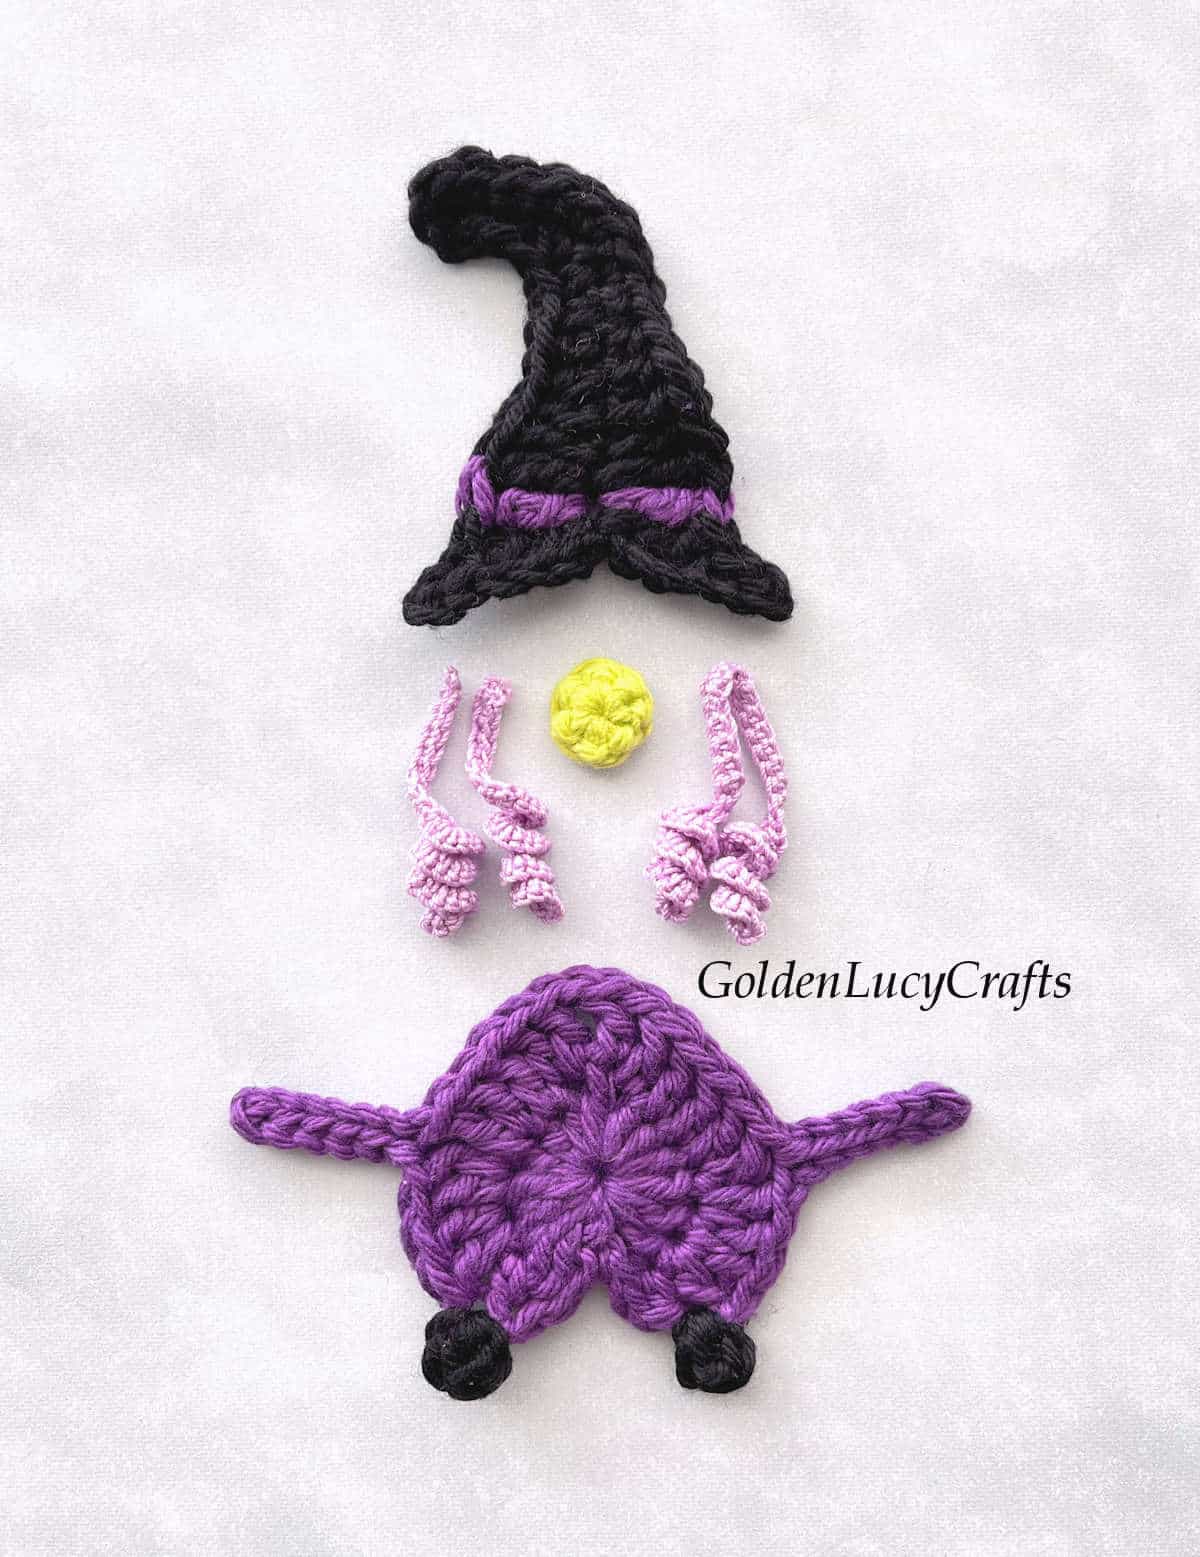 Elements of crocheted witch applique.